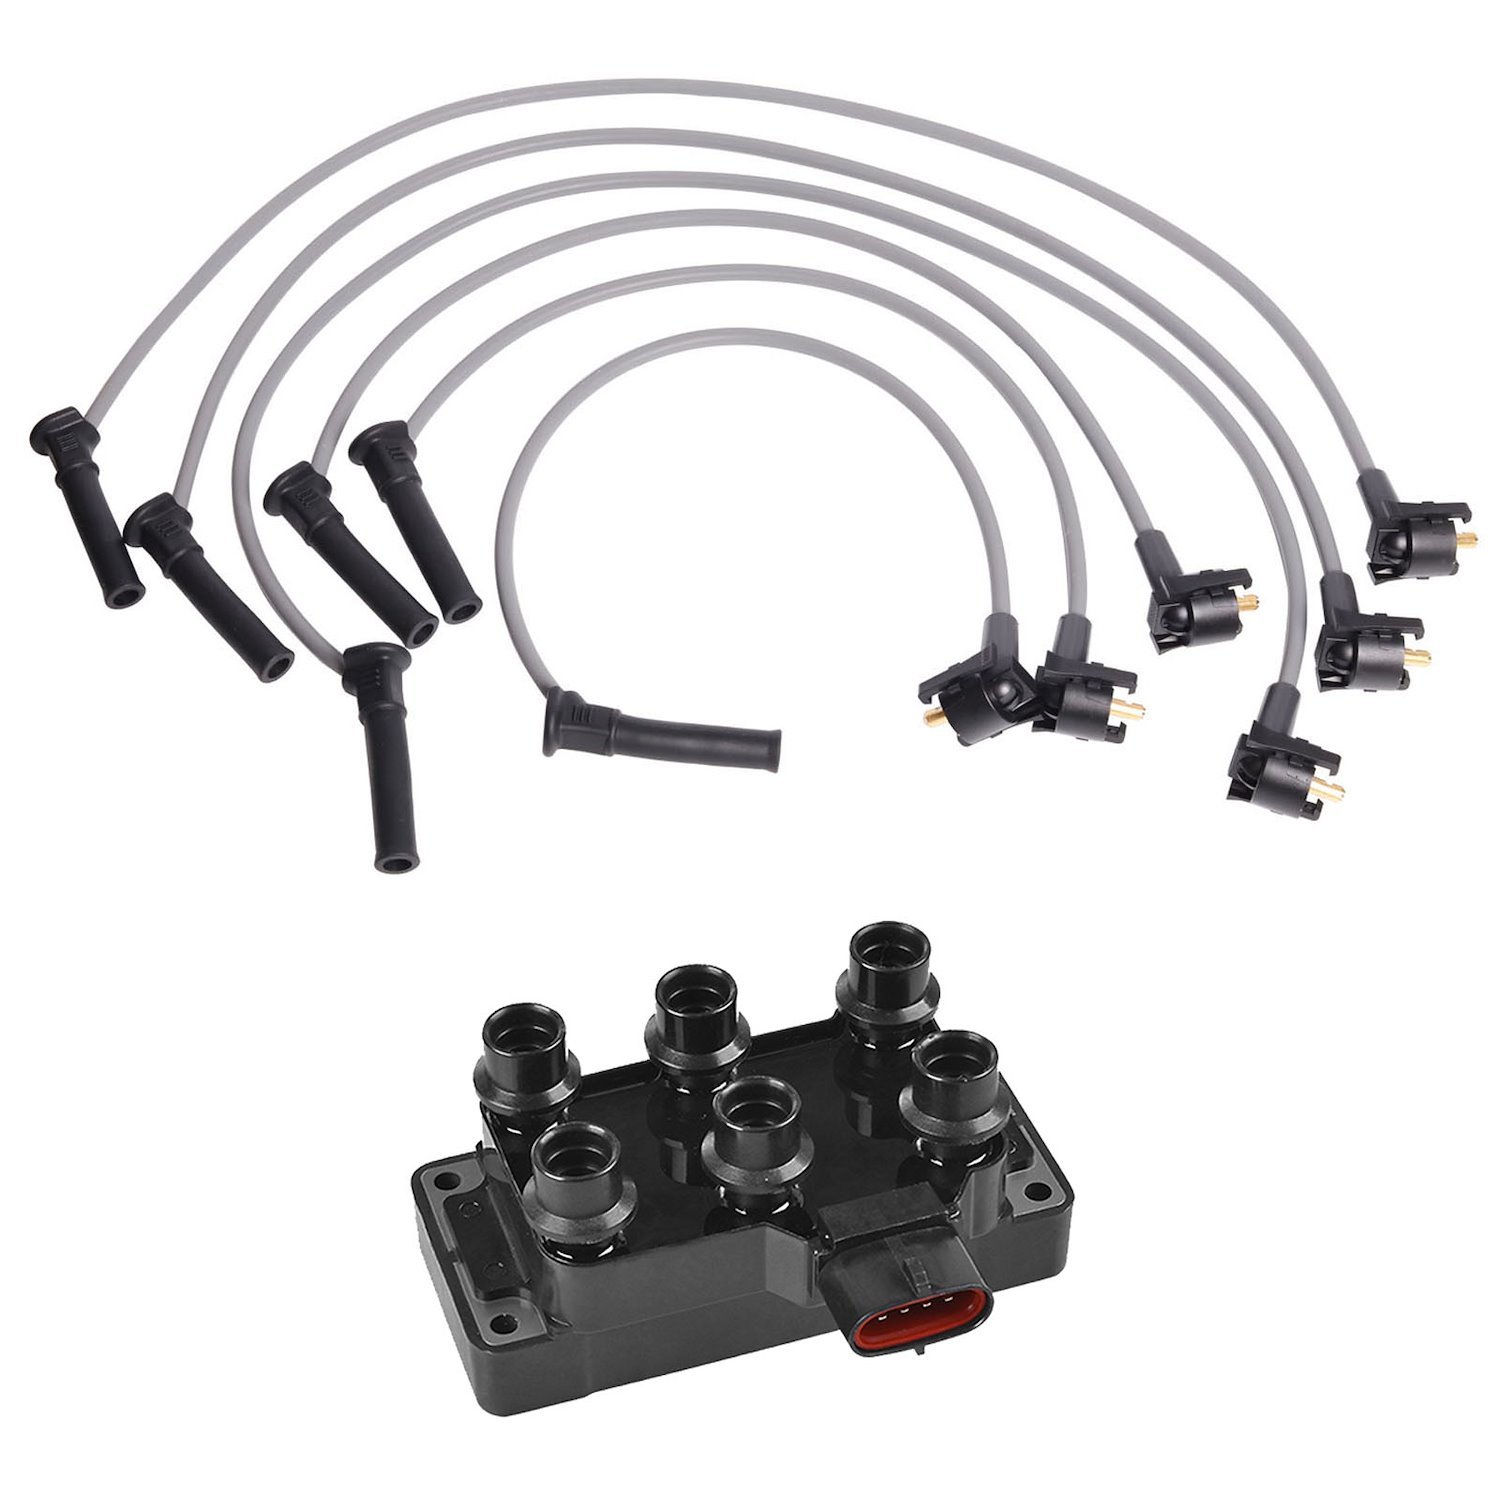 OE Replacement Ignition Coil and Spark Plug Kit, Ford Explorer 4.0/4.2L V6, Mercury B3000 4.0/4.2L V6